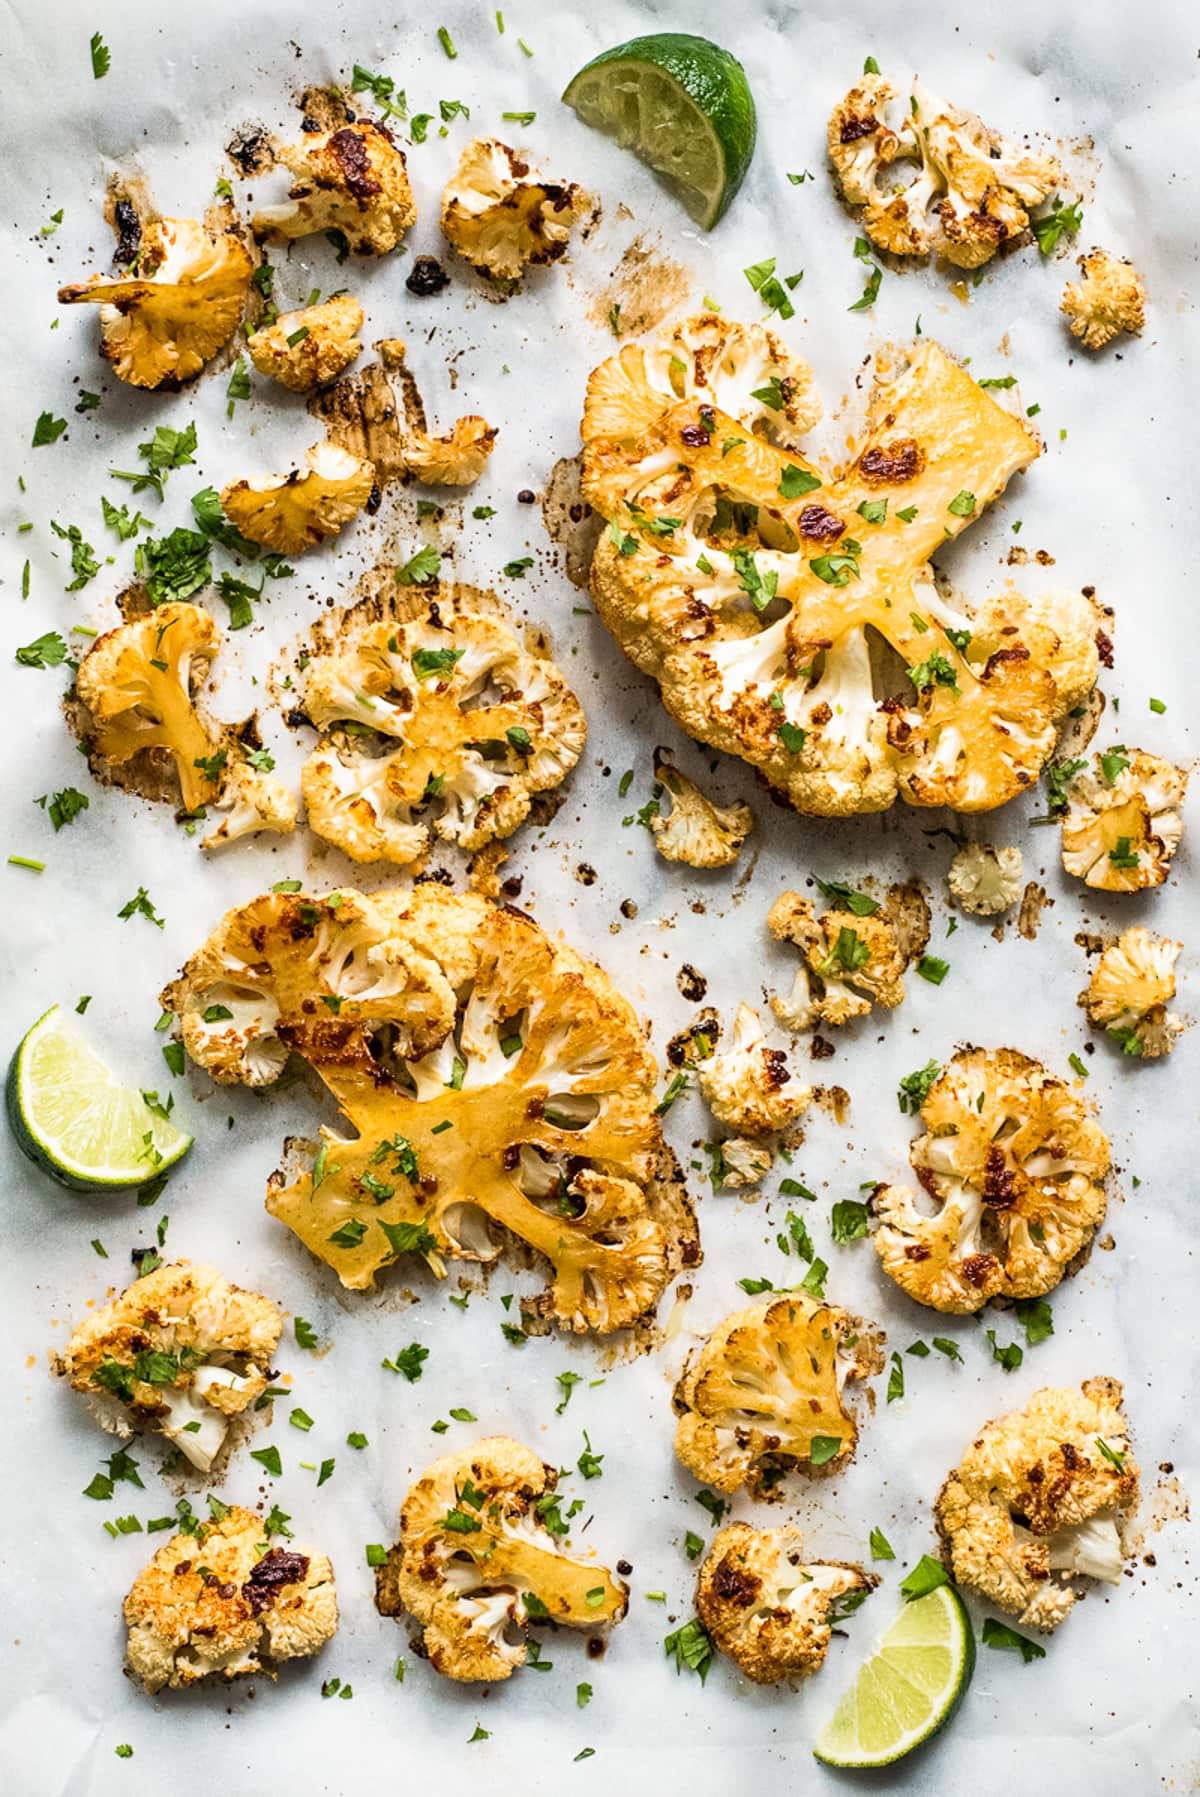 Spicy roasted cauliflower on parchment paper.